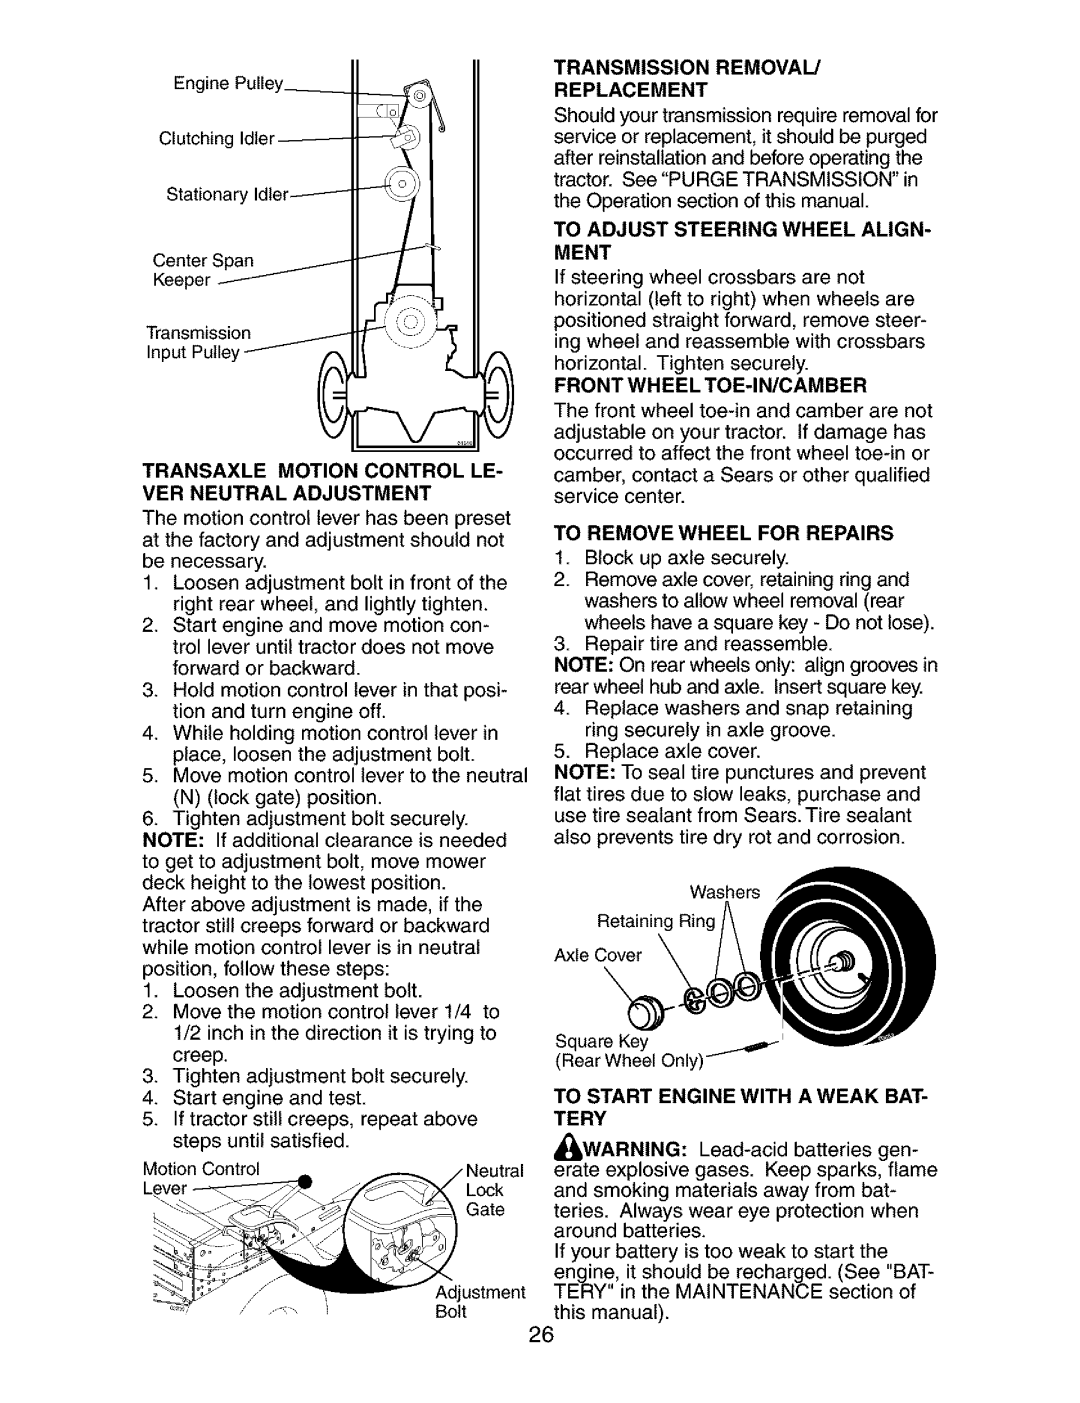 Craftsman 917.273763 owner manual Transaxle Motion Control LE- VER Neutral Adjustment, Transmission Removal Replacement 